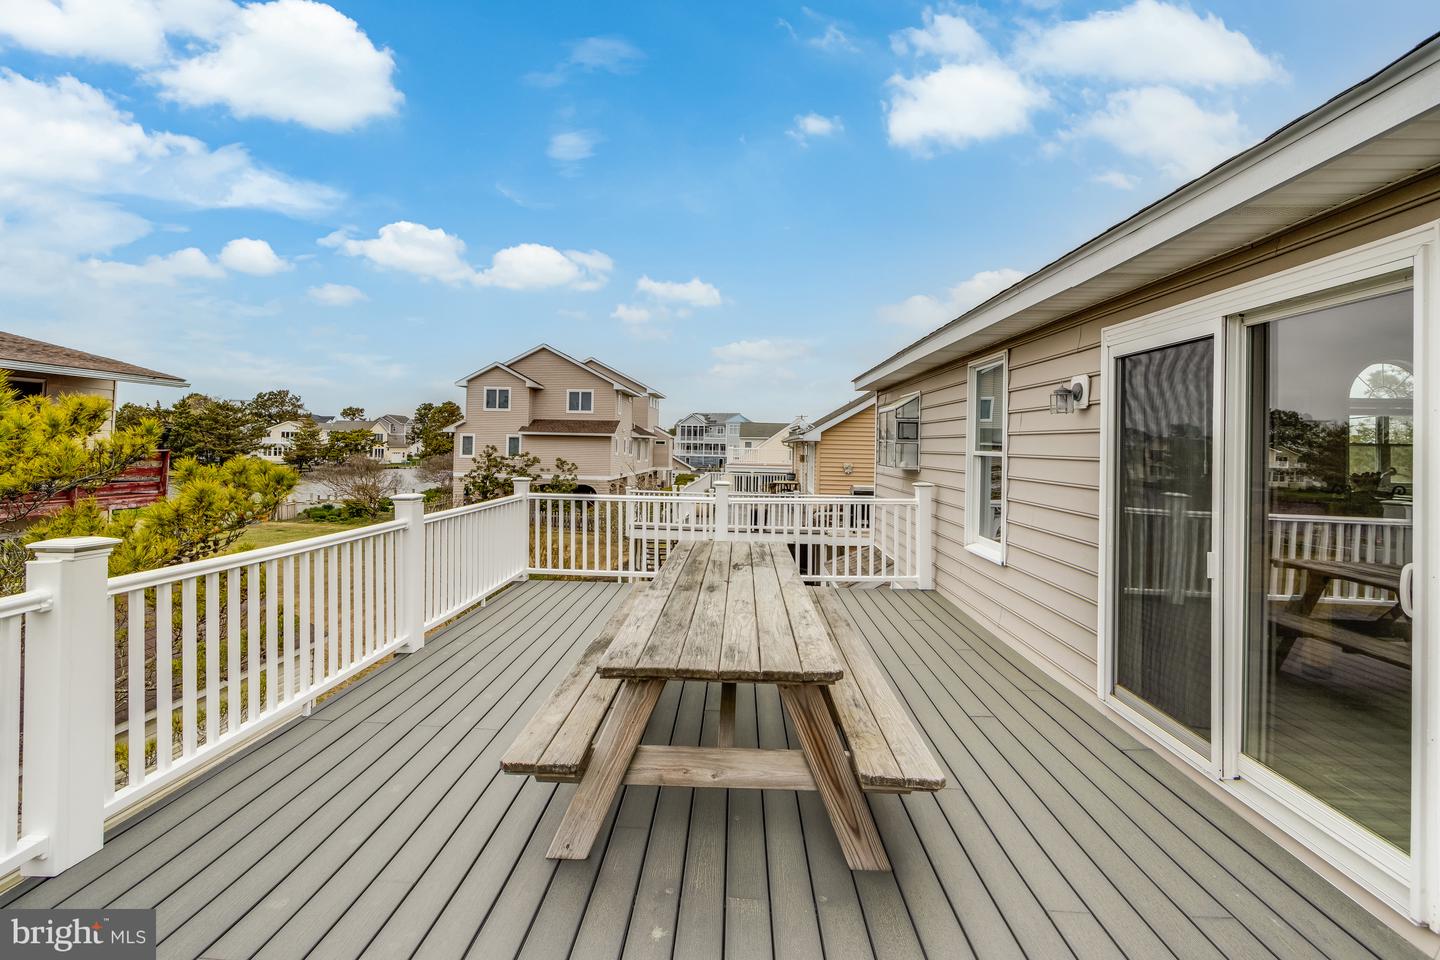 DESU2060190-803009595832-2024-04-21-00-08-05 35205 Hassell Ave | Bethany Beach, DE Real Estate For Sale | MLS# Desu2060190  - 1st Choice Properties